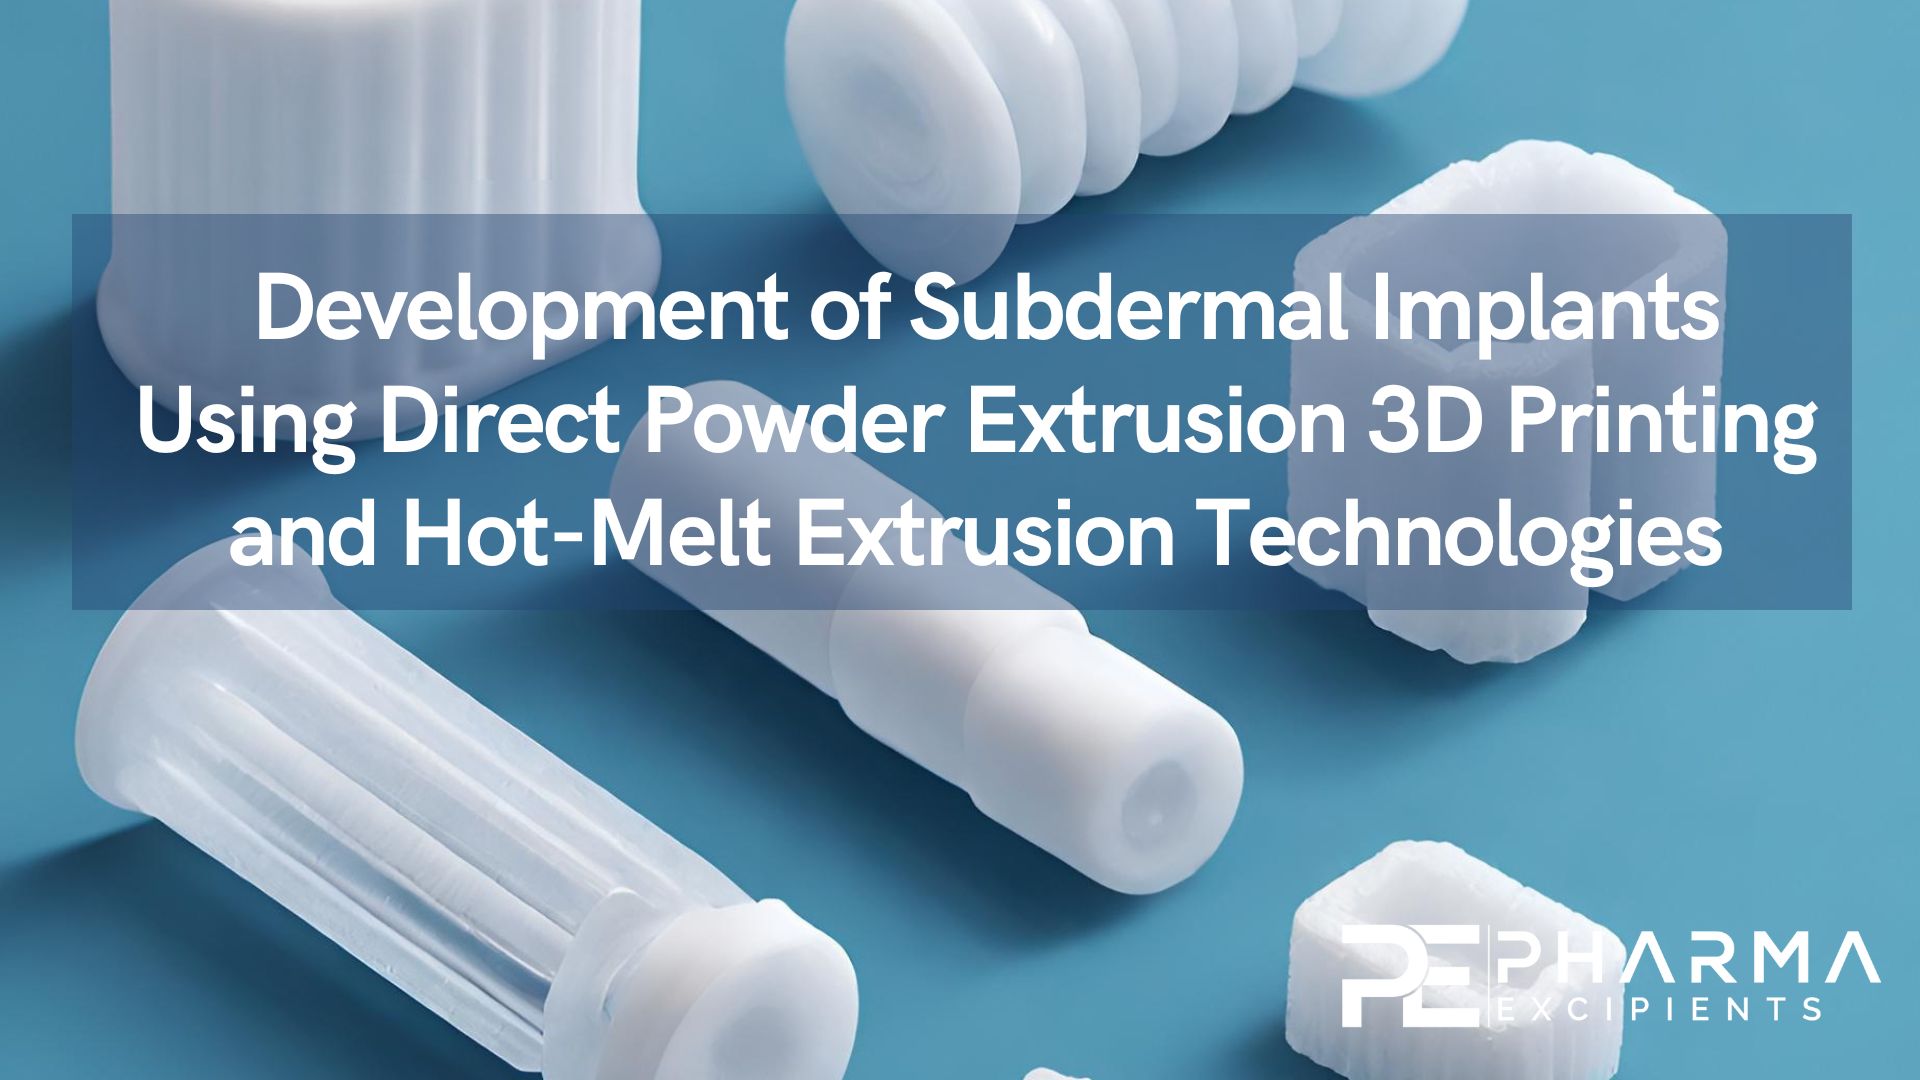 Development of Subdermal Implants Using Direct Powder Extrusion 3D Printing and Hot-Melt Extrusion Technologies